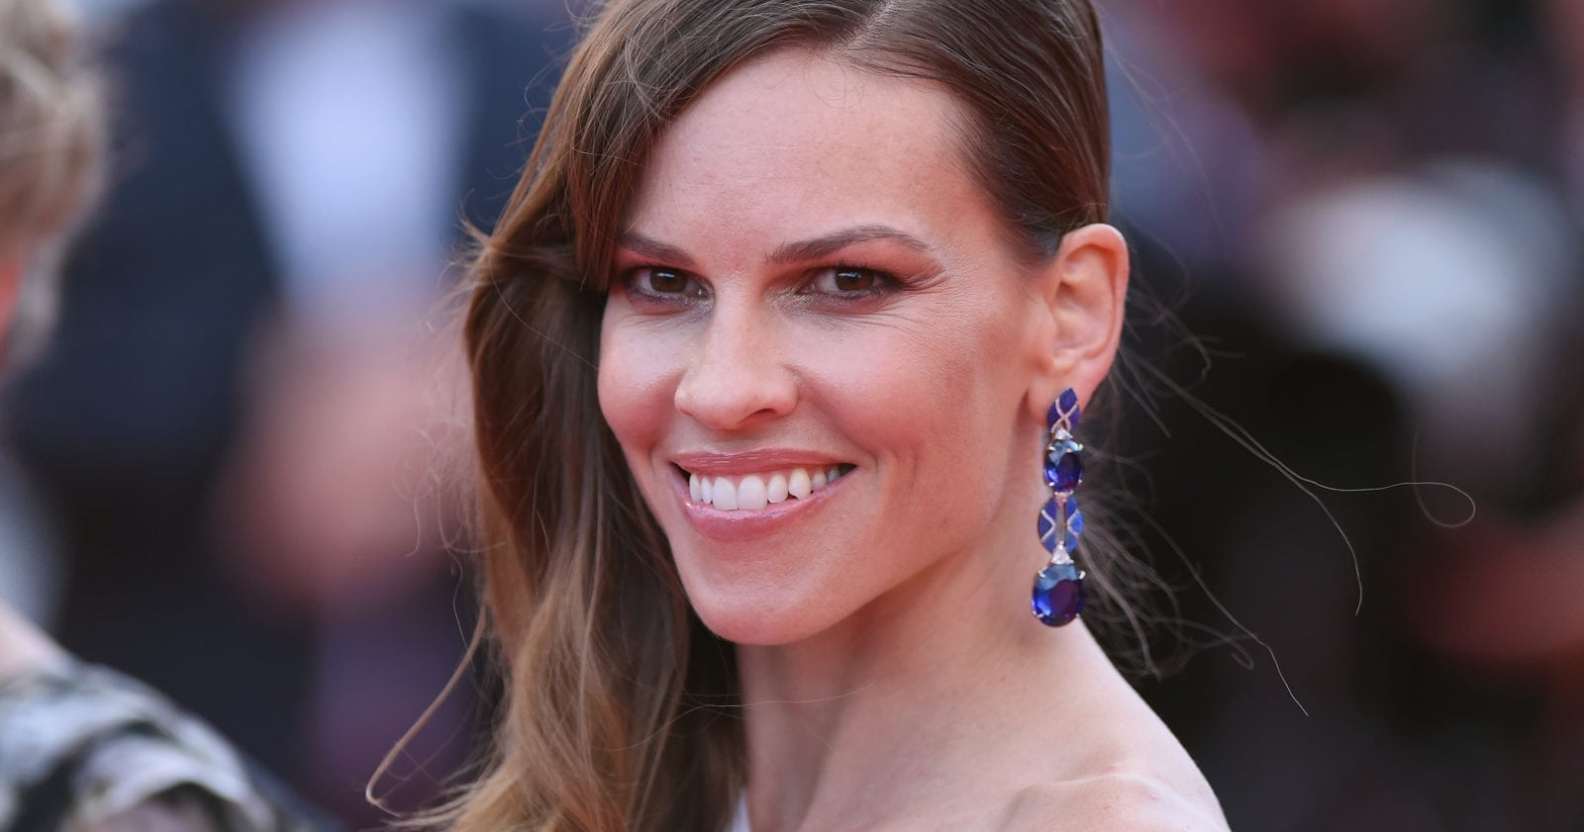 Hilary Swank says trans actor would've been better for Boys Don't Cry